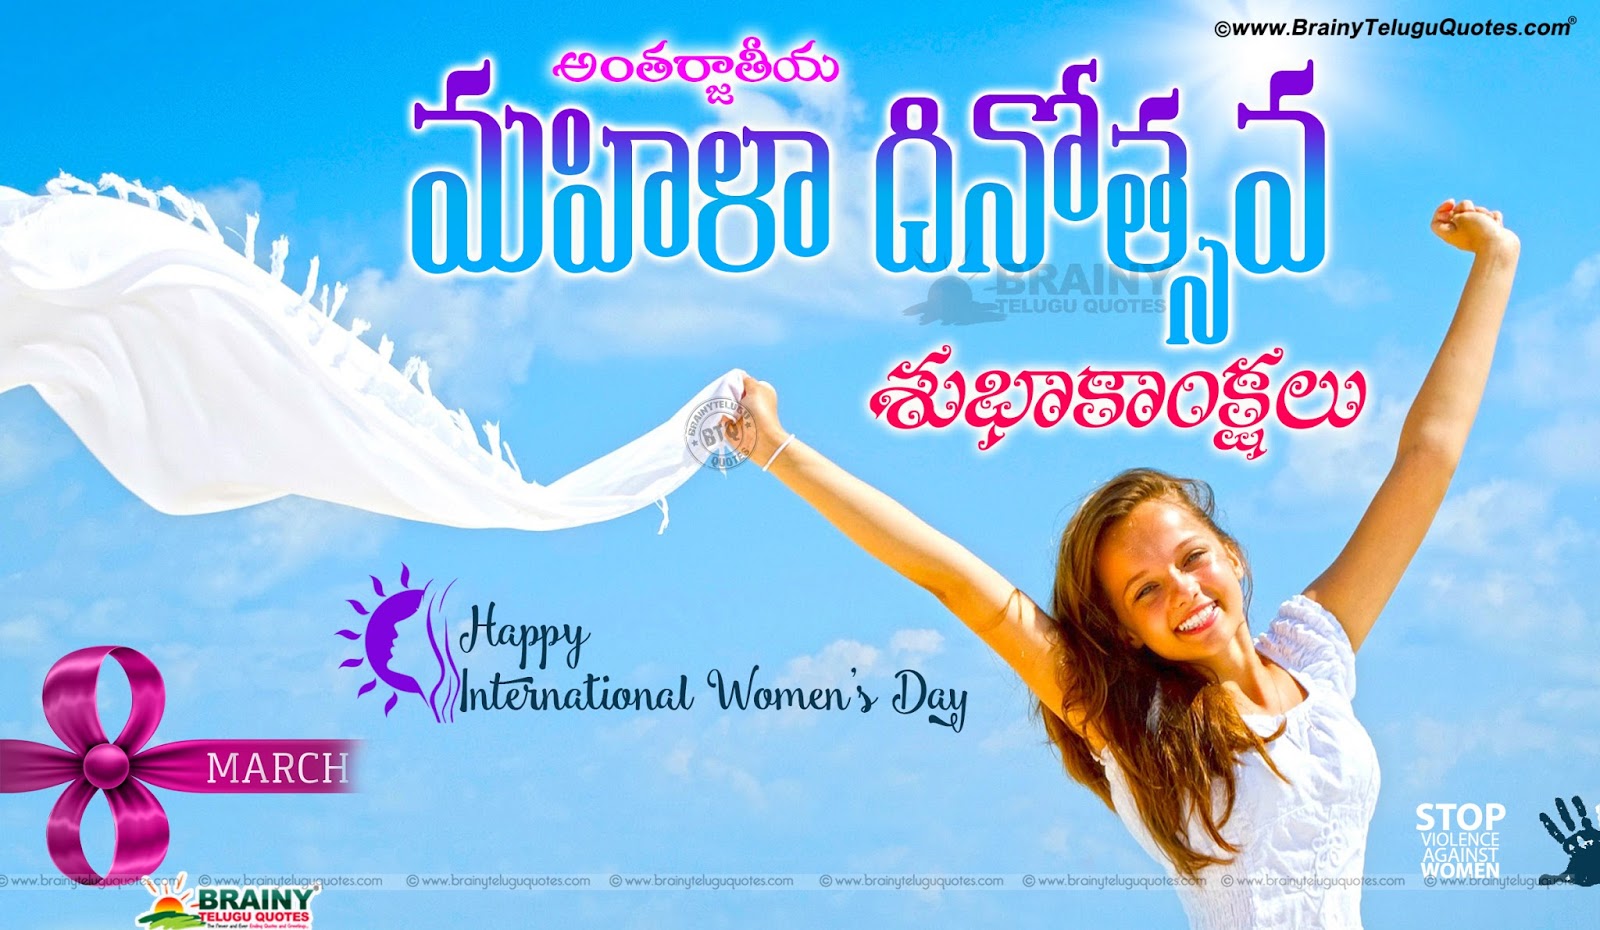 Happy International Woman s Day greetings with hd wallpapers Woman s day messages in Telugu